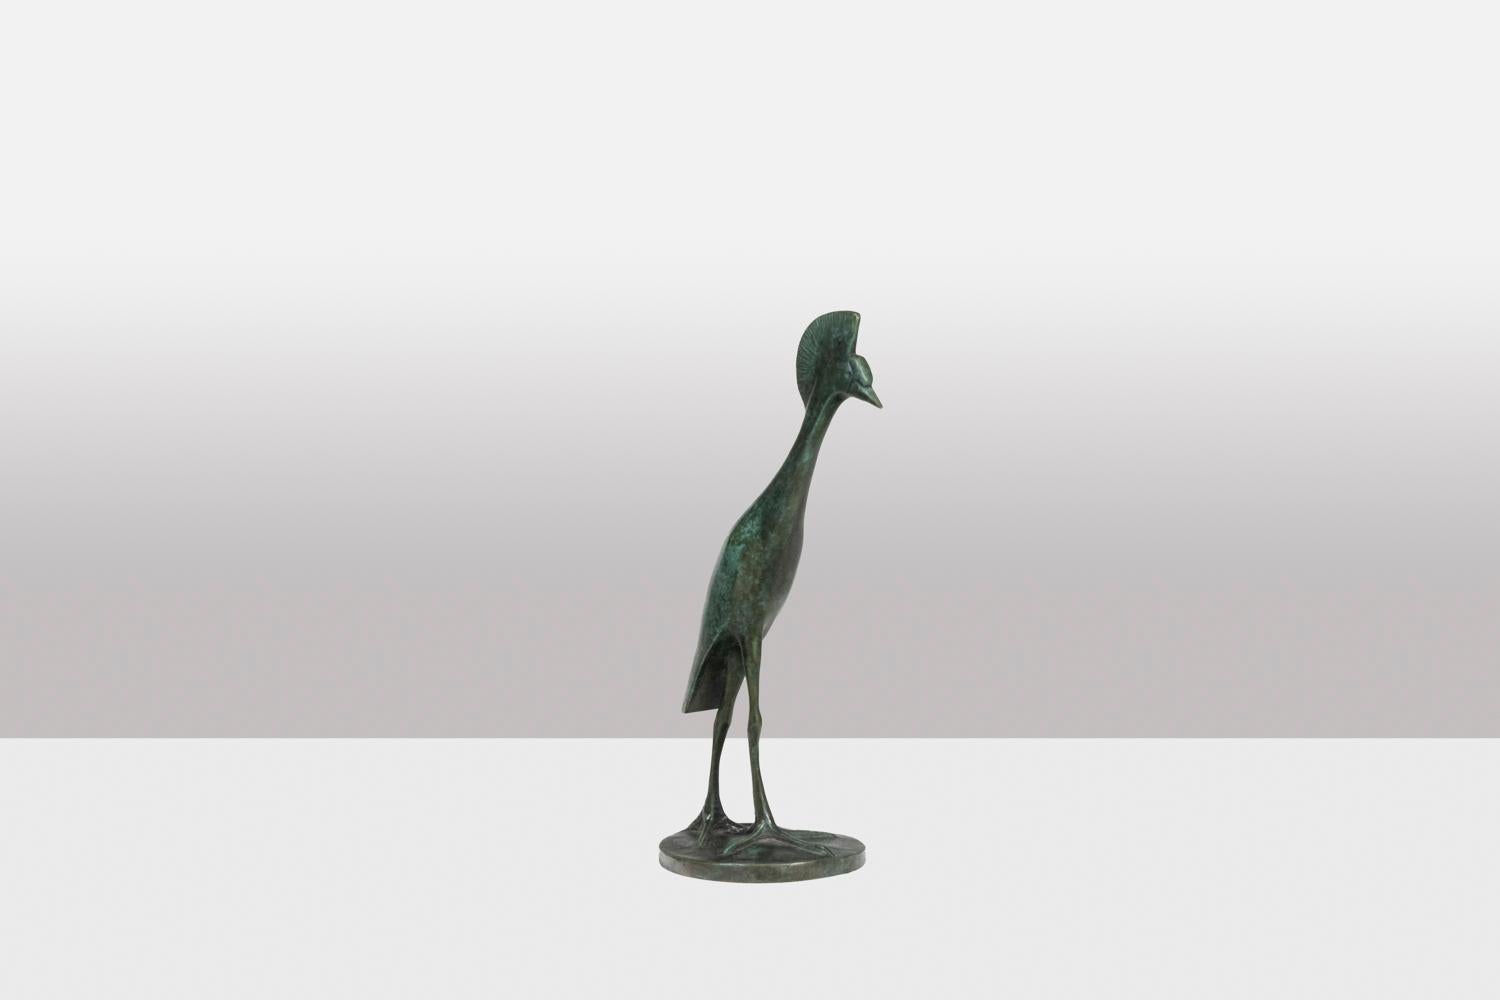 François Pompon.
Atelier Valsuani, edited by.

Sculpture entitled “Grue Couronnée en marche”. Bronze with green patina, lost wax casting.

Stamp of the Foundry “cire perdue C. Valsuani”, on the terrace. Reproduction dated 2006. Numbered